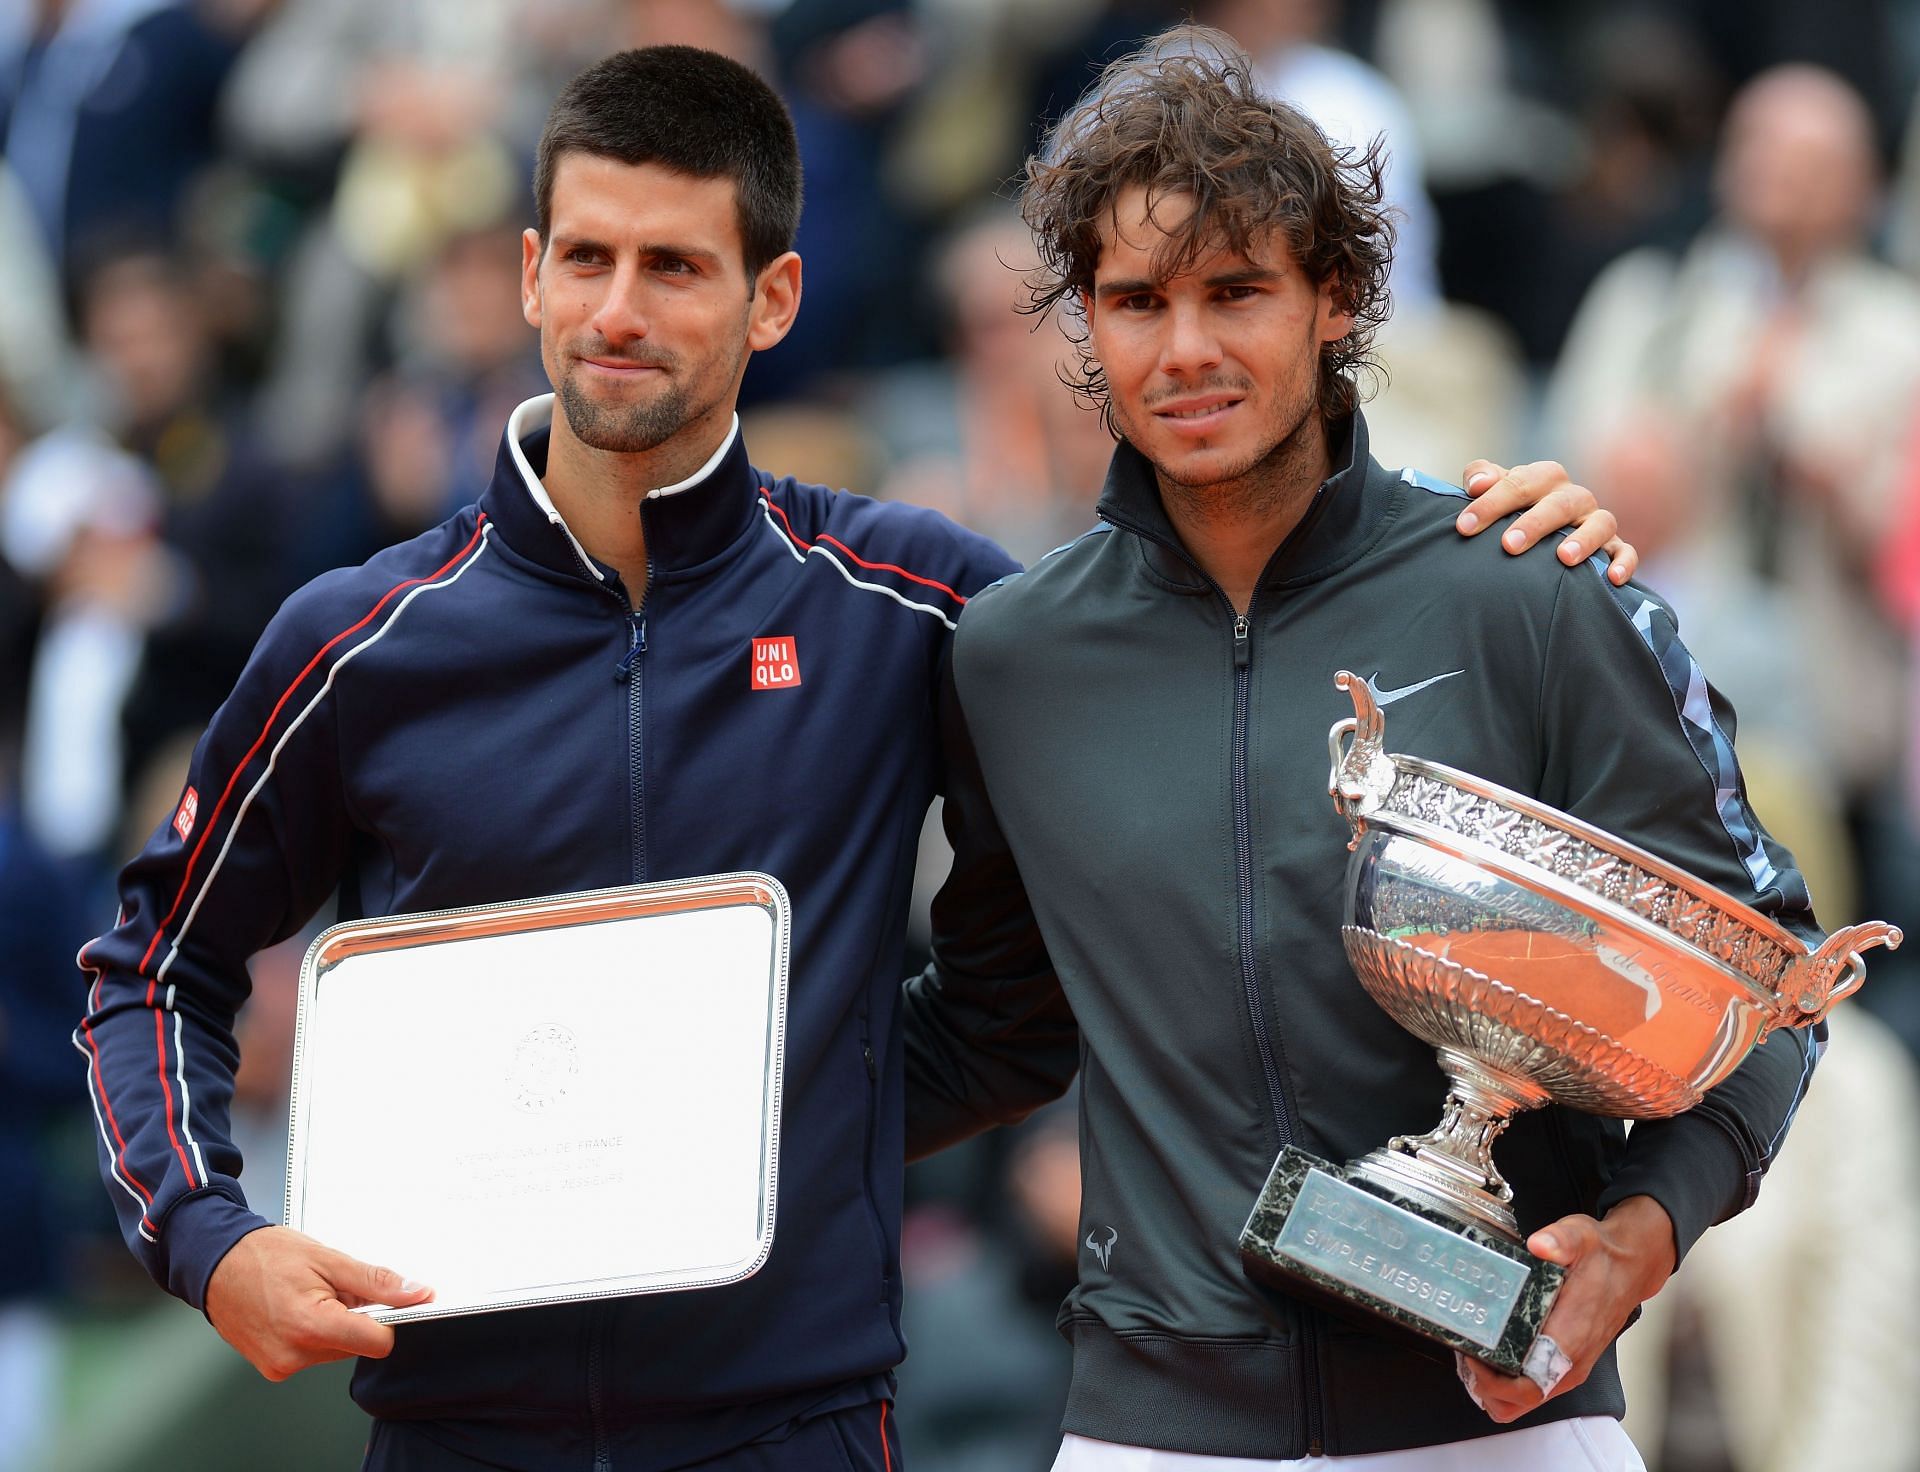 The duo pictured at the 2012 French Open.